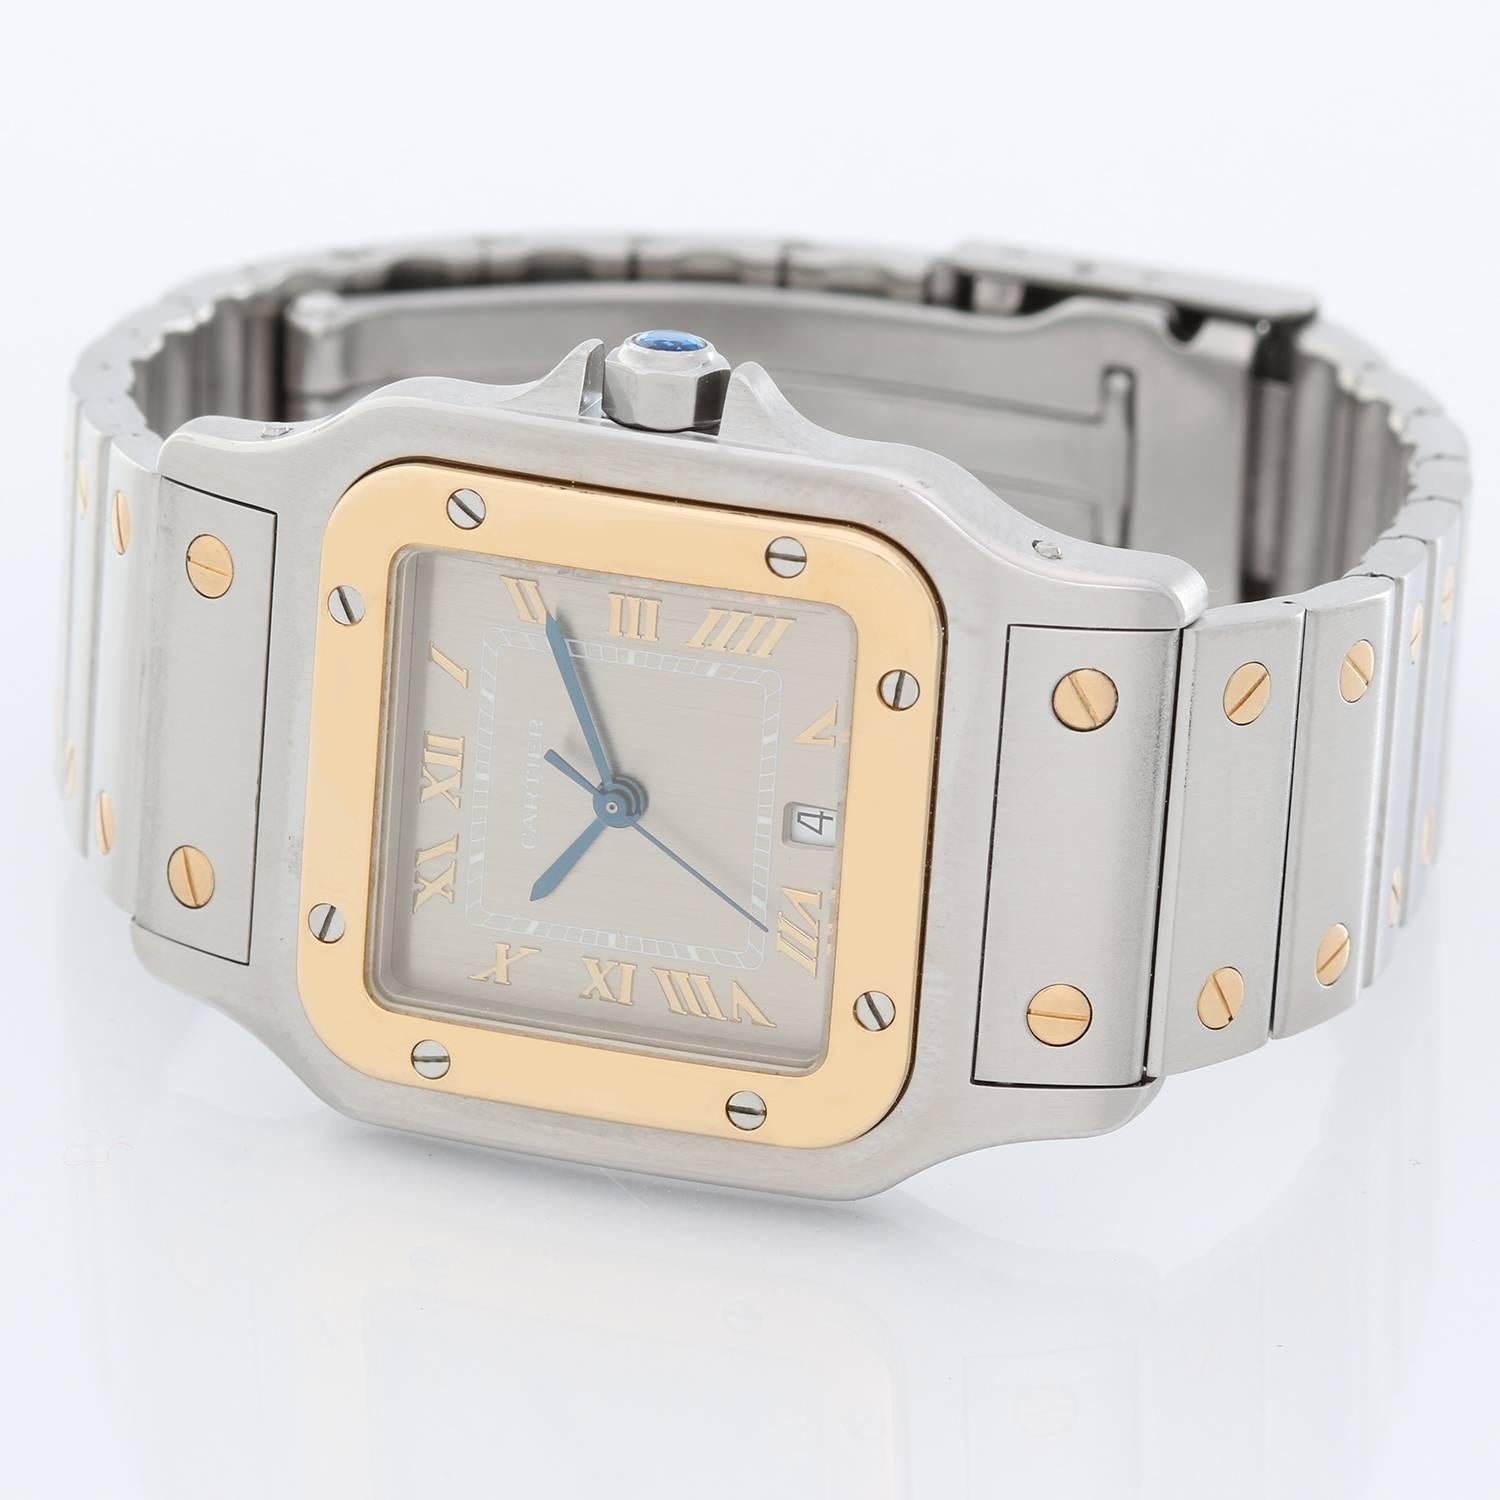 Cartier Santos Men's 2-Tone Steel & Gold Quartz Watch W20011C4 - Quartz. Stainless steel case with 18k yellow gold bezel (29mm x 41mm). Silver dial with gold Roman numerals and date at 6 o'clock. Stainless steel Santos bracelet with gold screws.